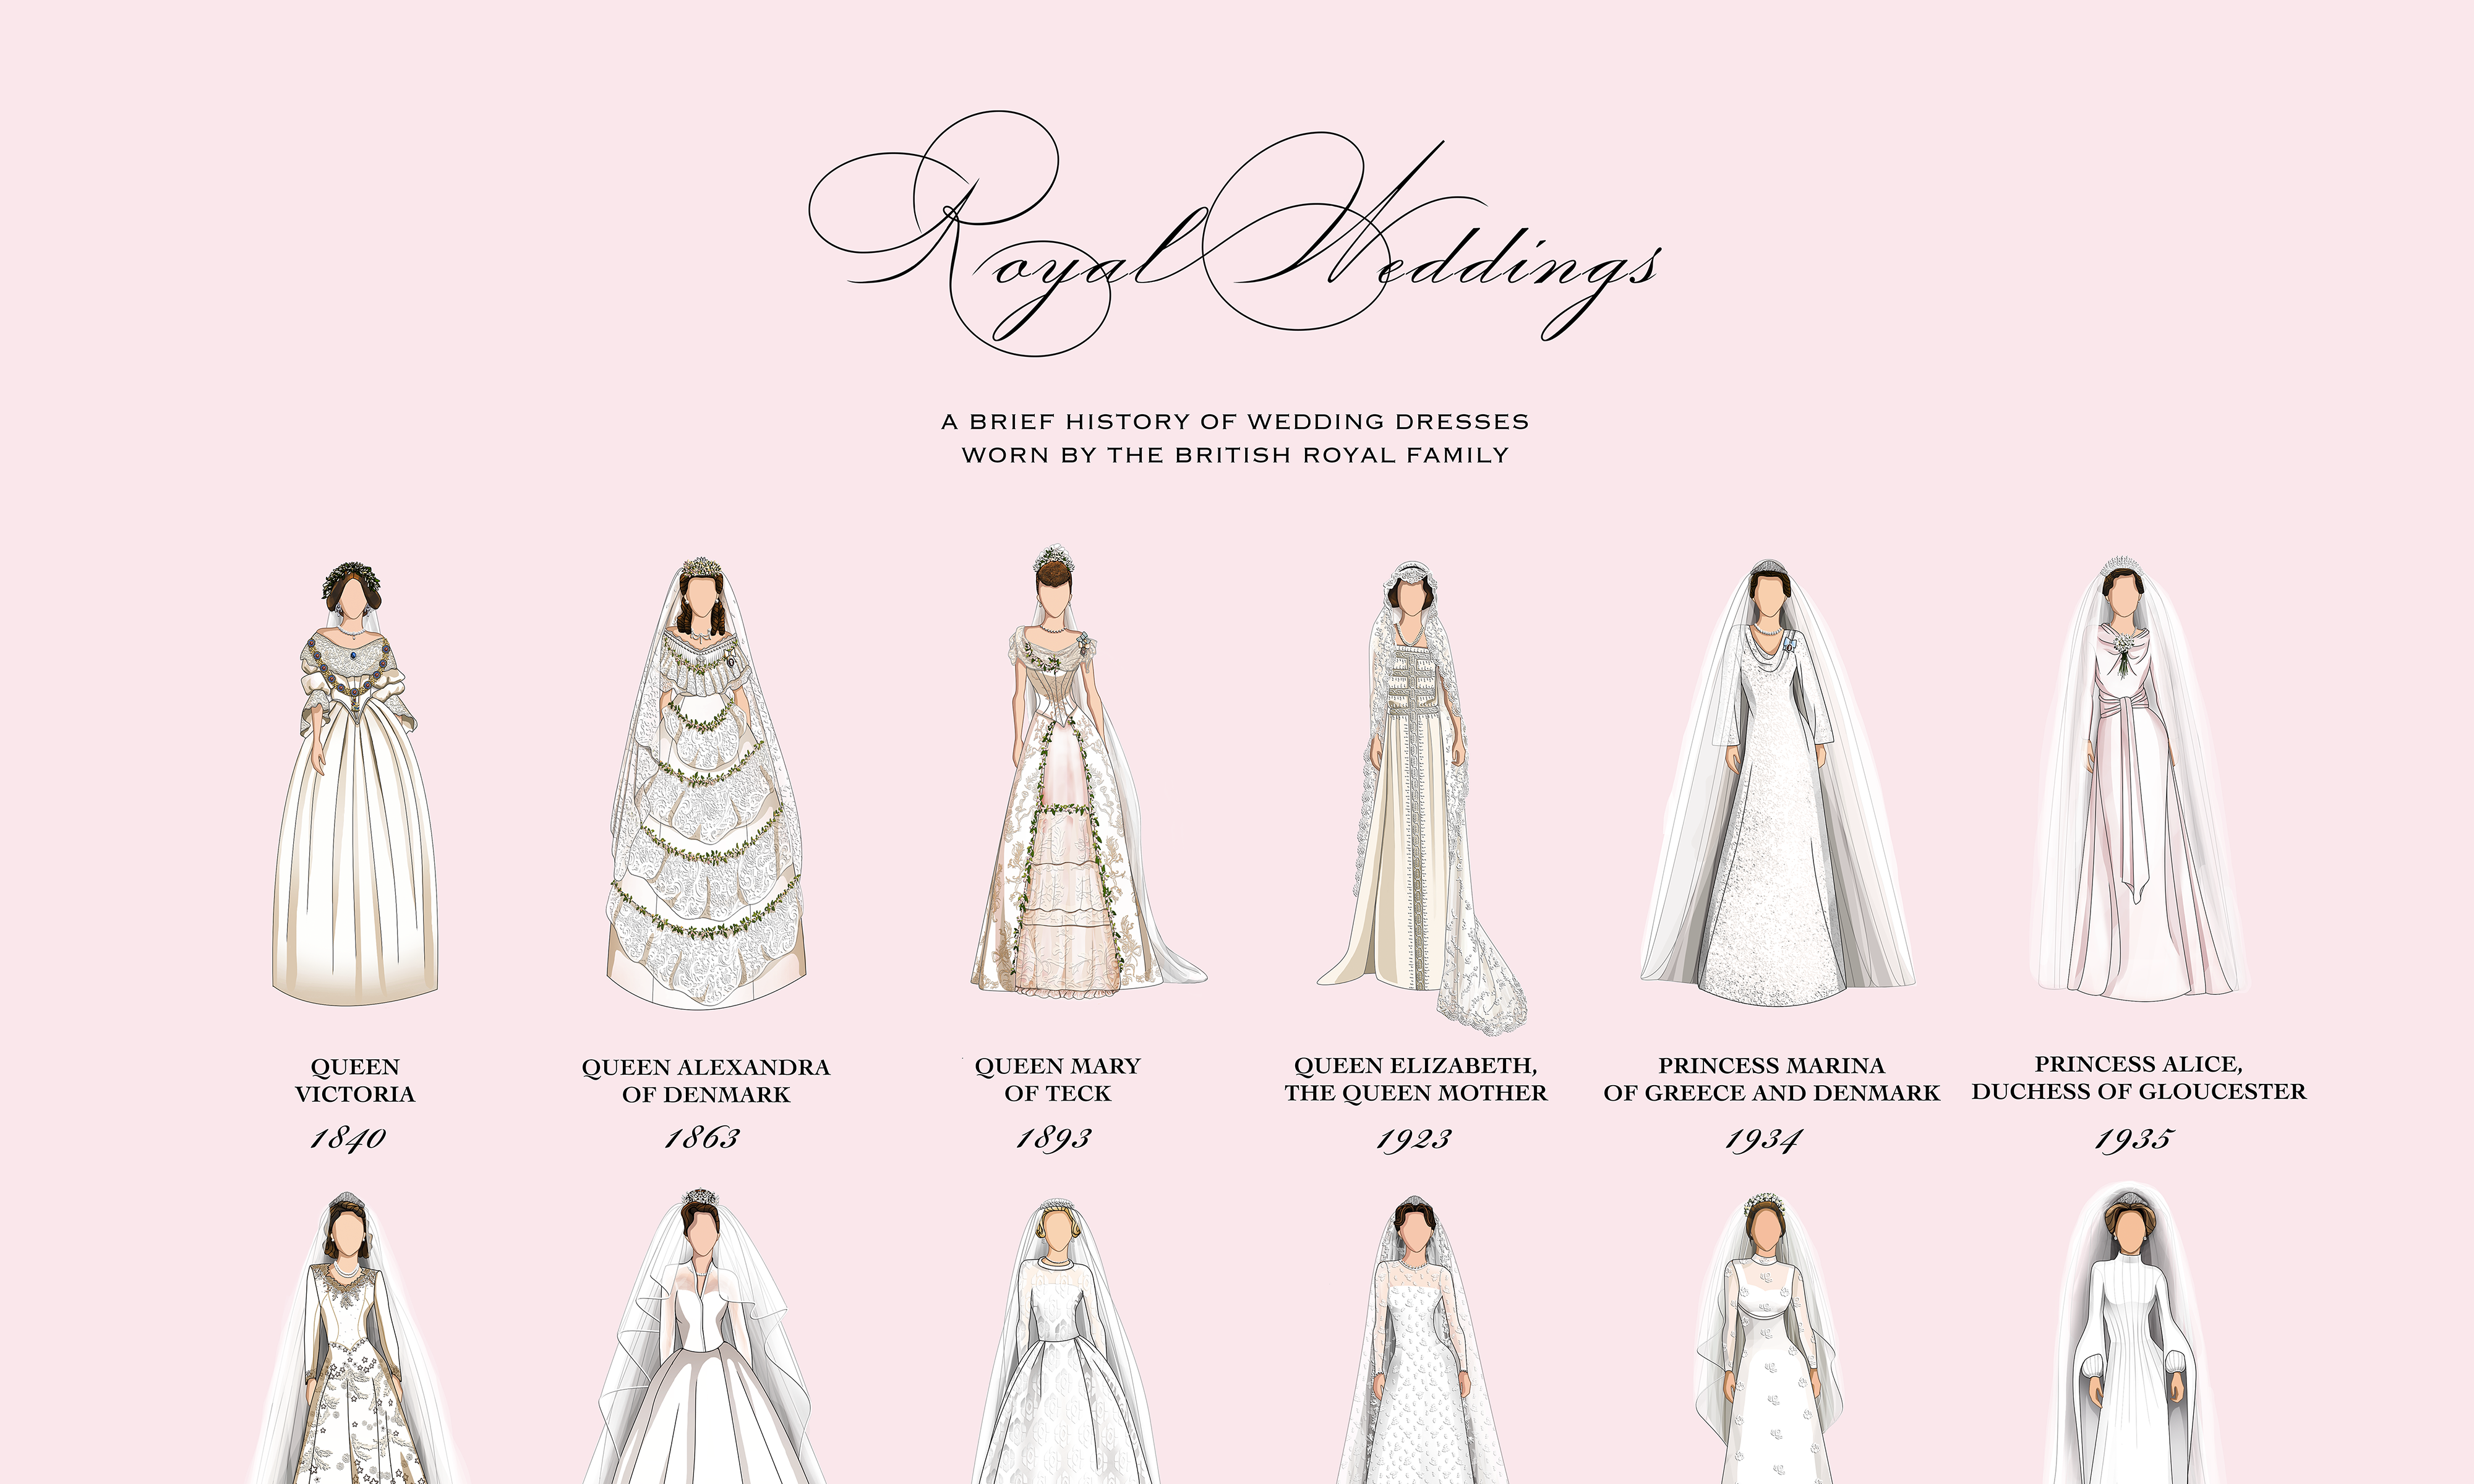 Leah Zhao Art and Design - Royal Wedding Dresses Infographic